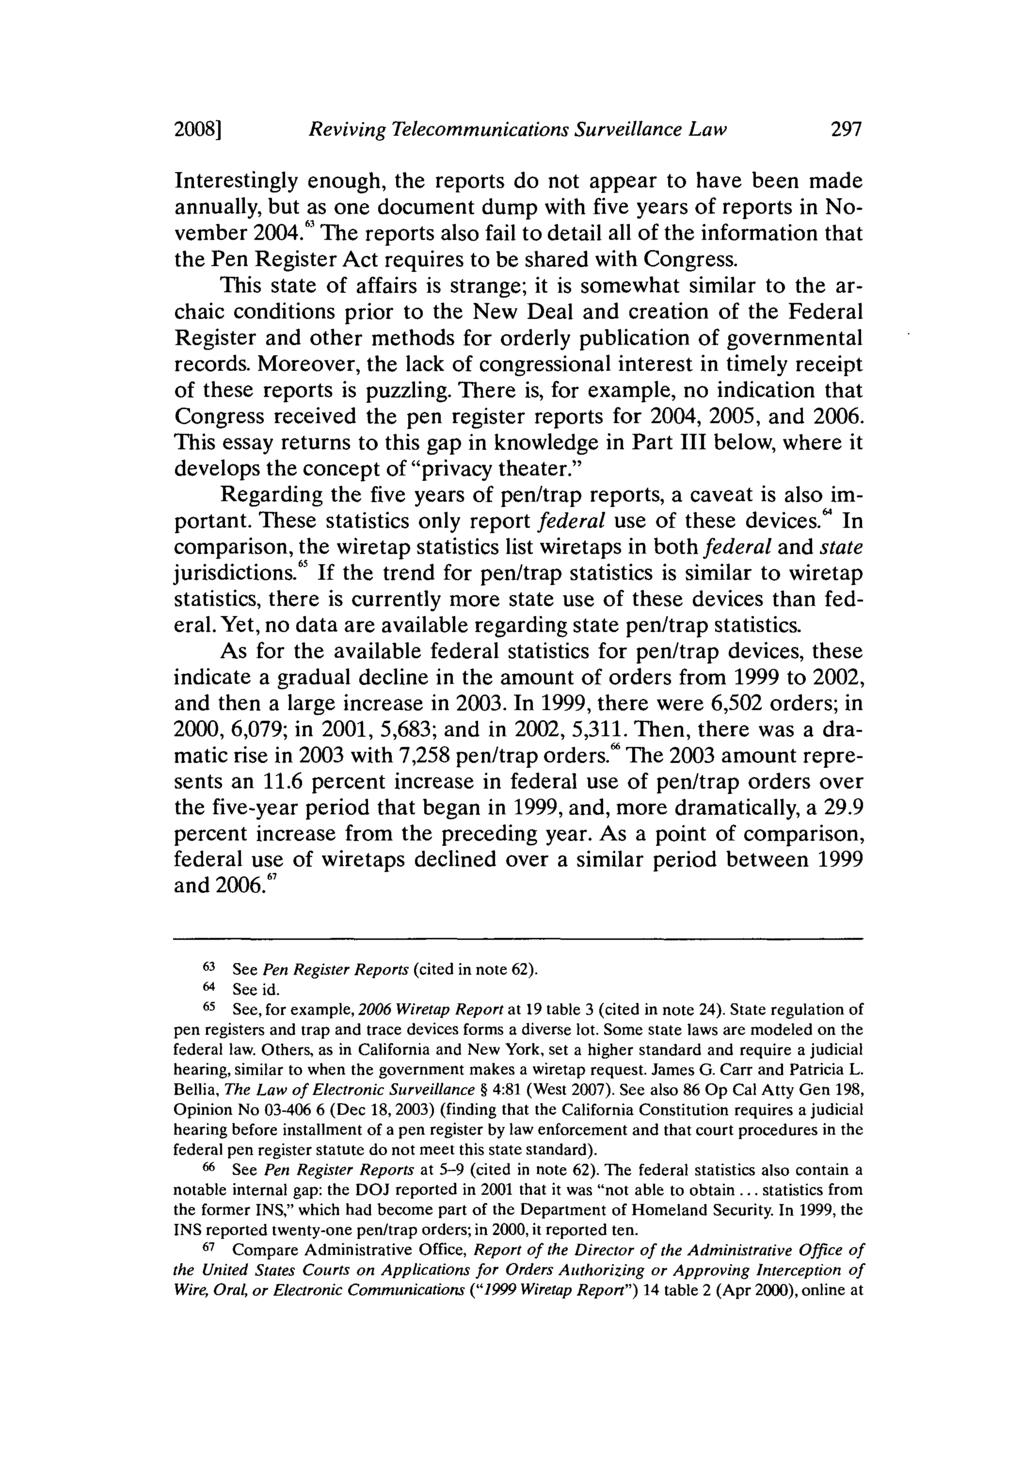 2008] Reviving Telecommunications Surveillance Law Interestingly enough, the reports do not appear to have been made annually, but as one document dump with five years of reports in November 2004.